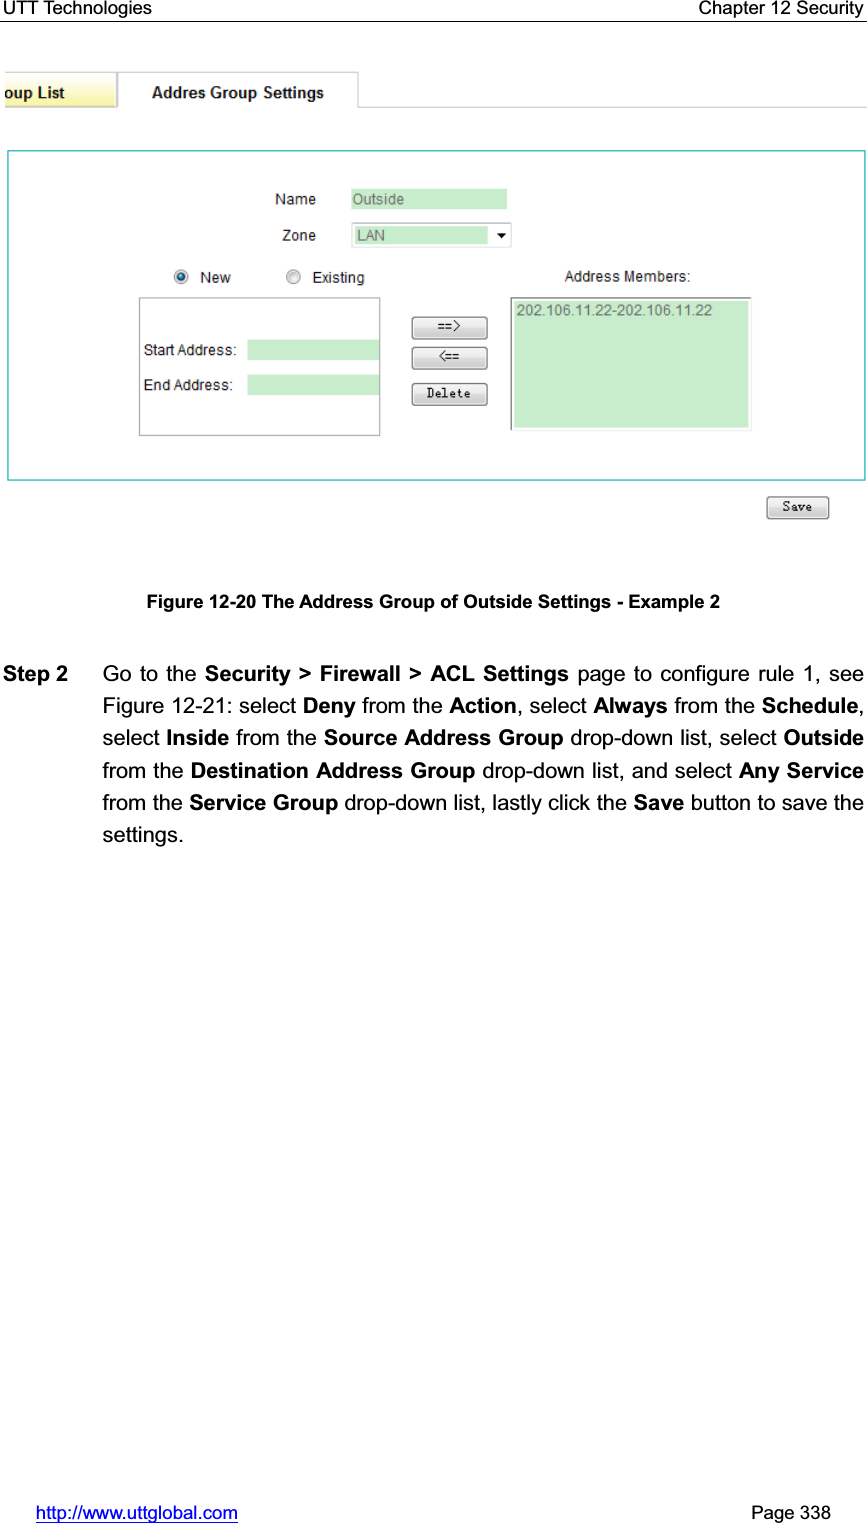 UTT Technologies    Chapter 12 Security   http://www.uttglobal.com                                                       Page 338 Figure 12-20 The Address Group of Outside Settings - Example 2Step 2  Go to the Security &gt; Firewall &gt; ACL Settings page to configure rule 1, see Figure 12-21: select Deny from the Action, select Always from the Schedule,select Inside from the Source Address Group drop-down list, select Outsidefrom the Destination Address Group drop-down list, and select Any Service from the Service Group drop-down list, lastly click the Save button to save the settings. 